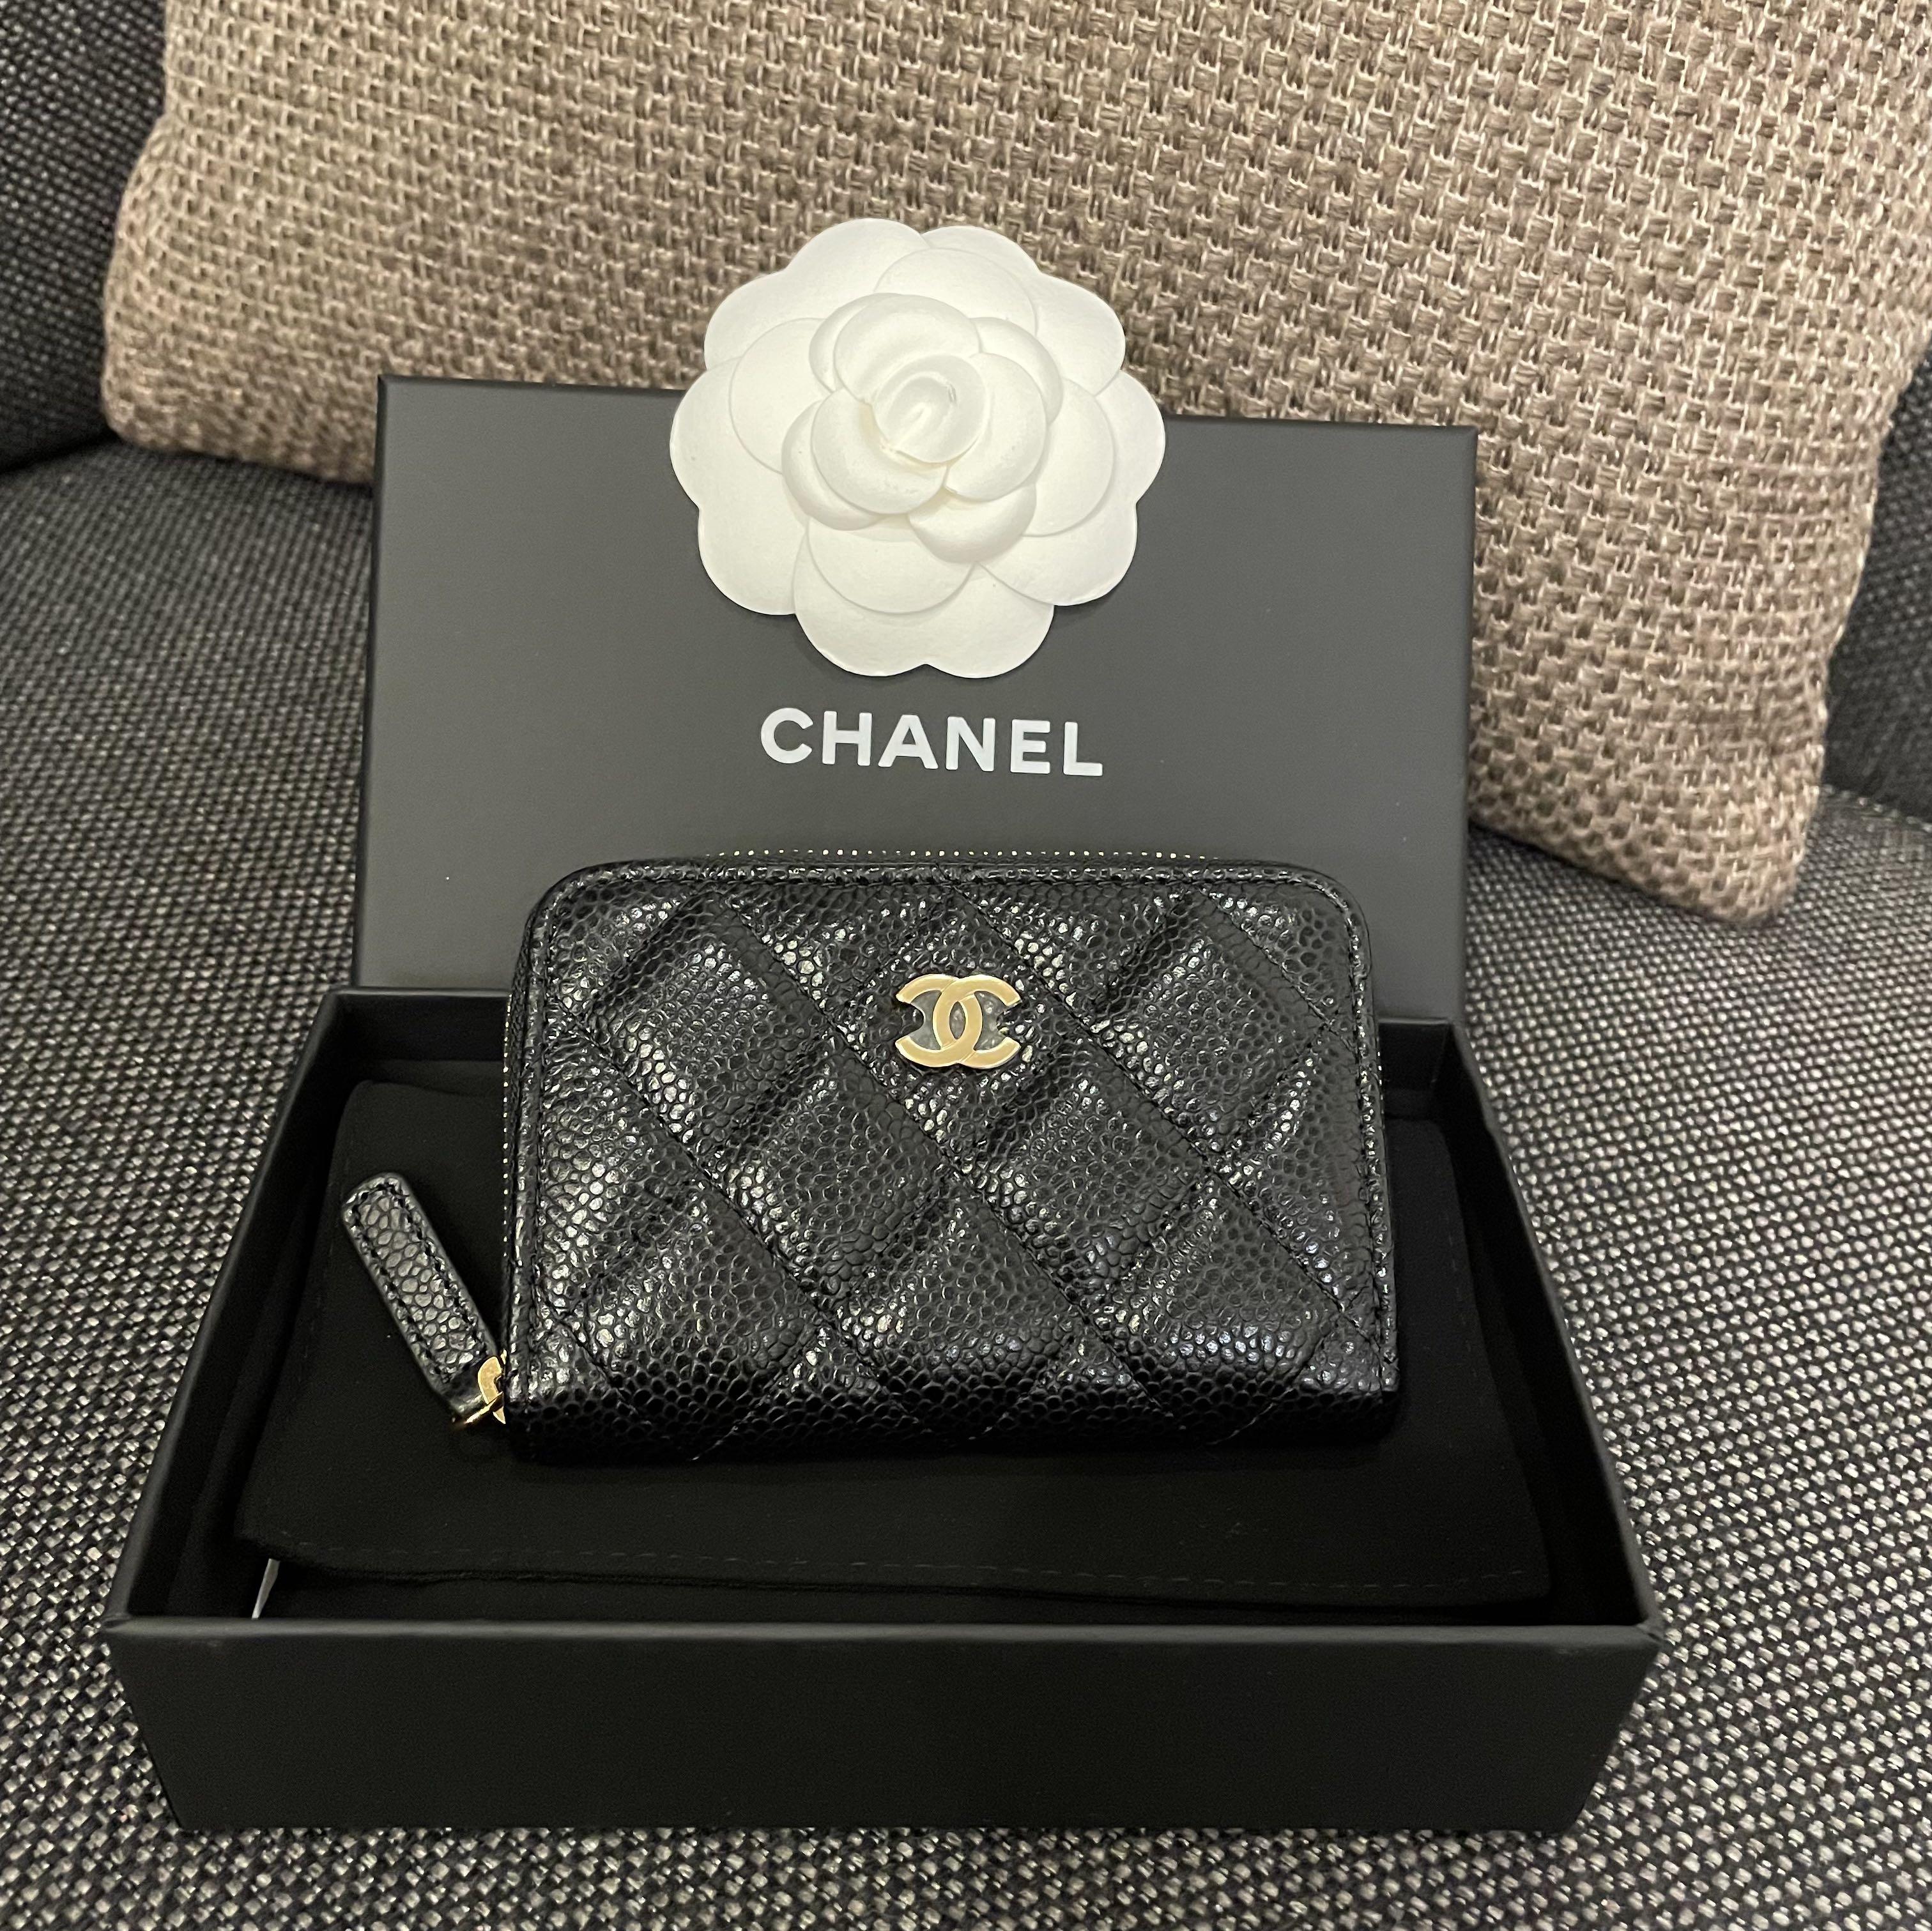 BRAND CHANEL WALLEY WITH GIFT RECEIPT FOR 1100 dollars navy BRAND